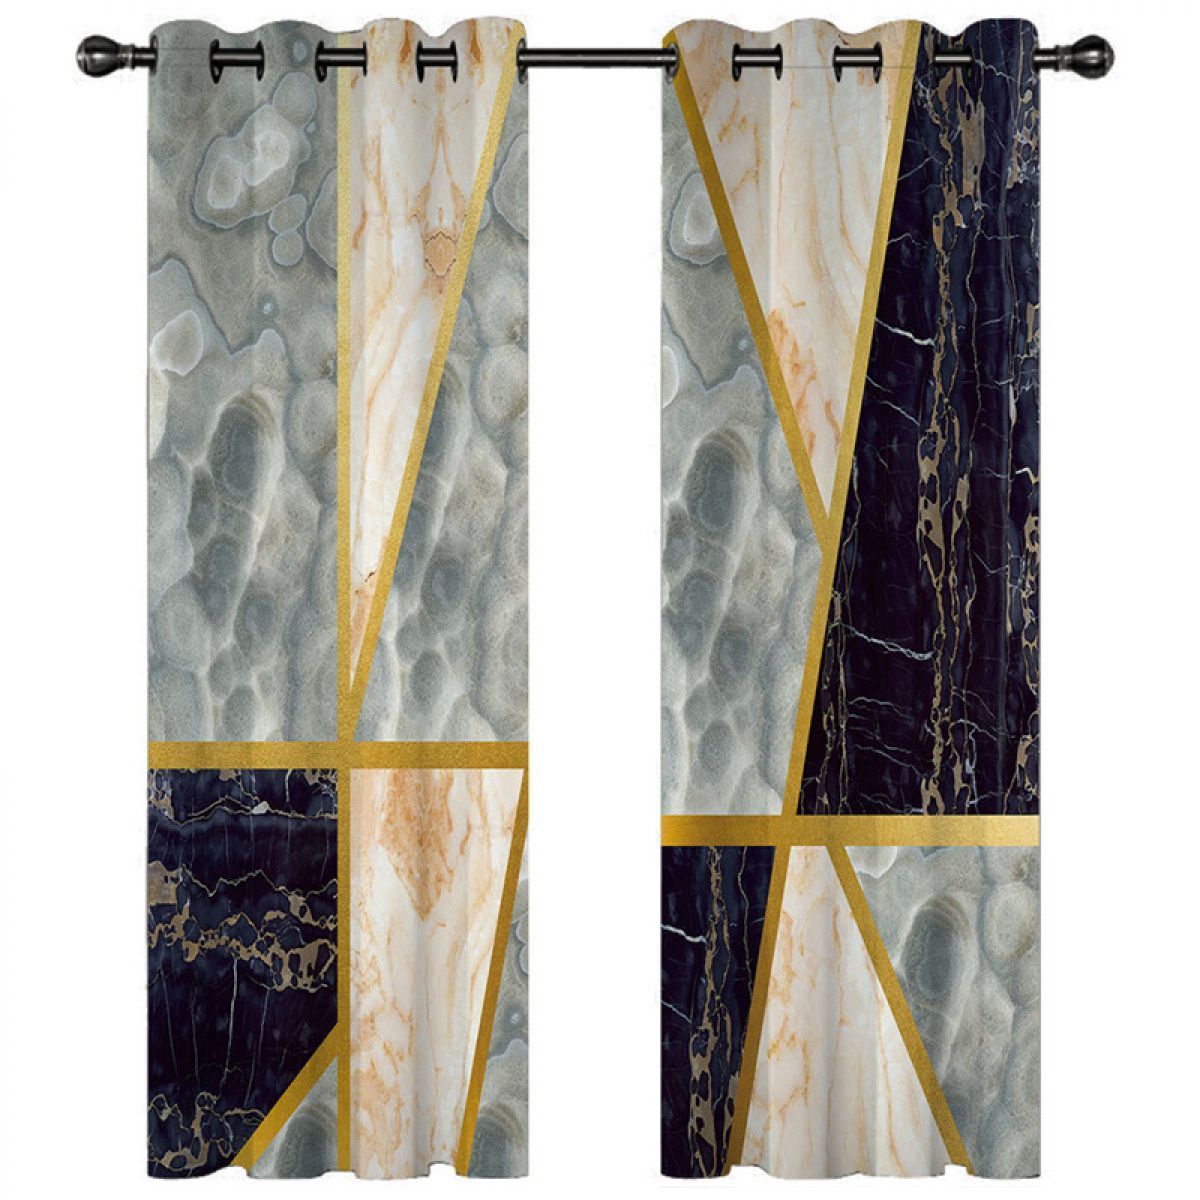 Abstract Figure Aesthetic Value Printed Window Curtain Home Decor